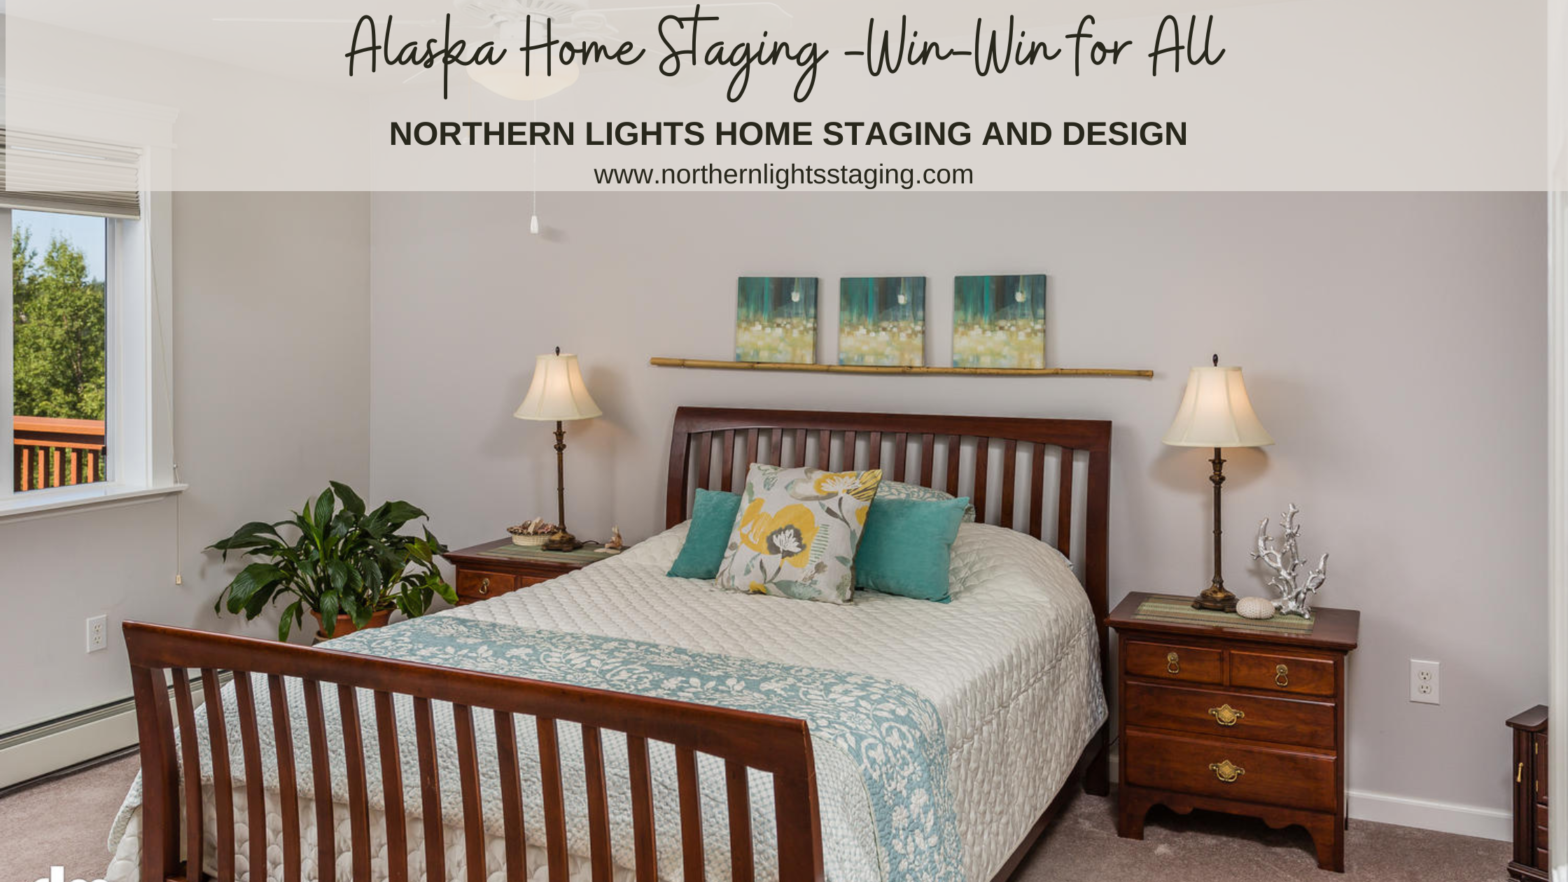 Alaska Home Staging- A Win-Win for All